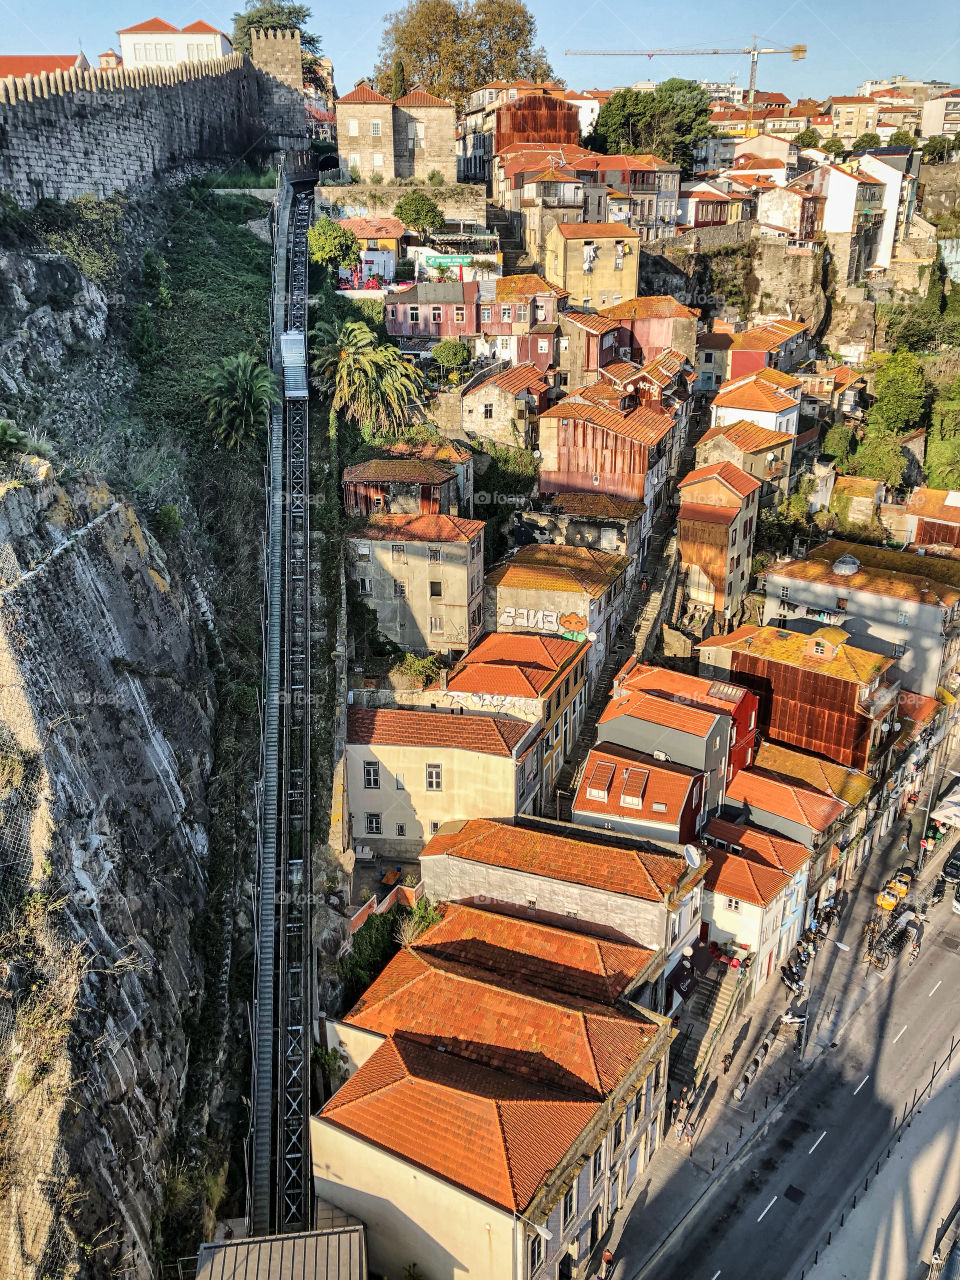 The view from up above the streets of Porto and funicular railway